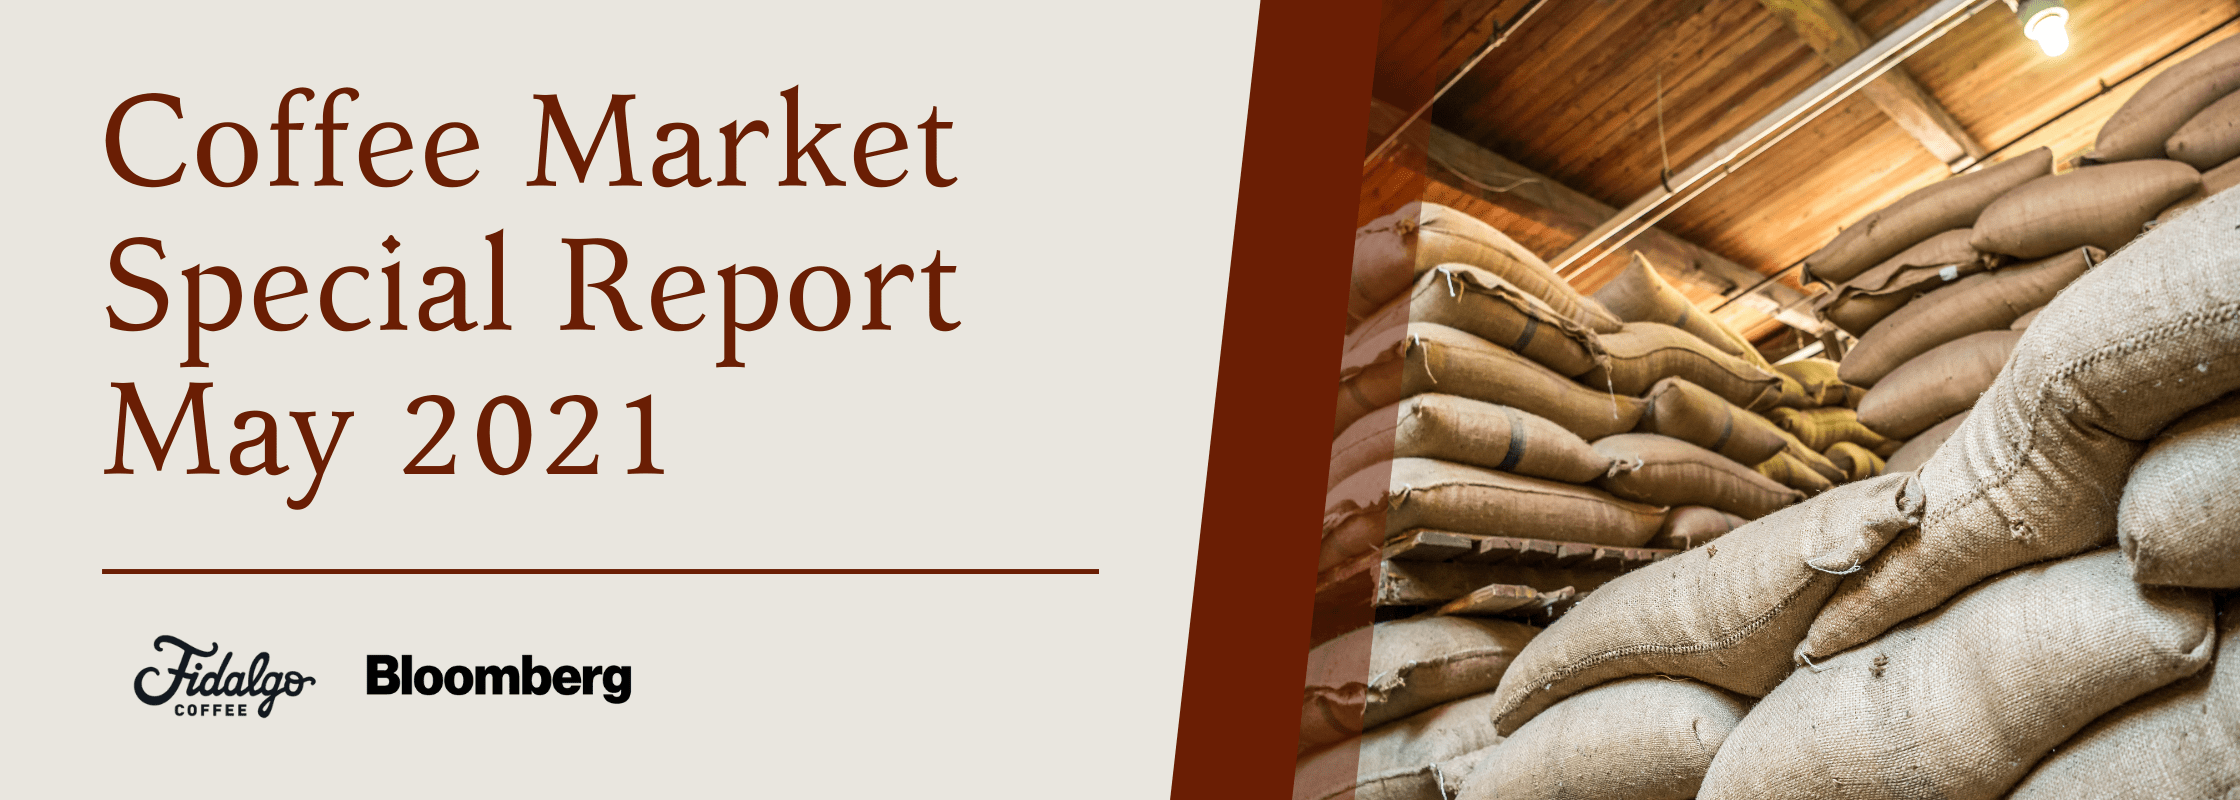 Coffee Market Special Report